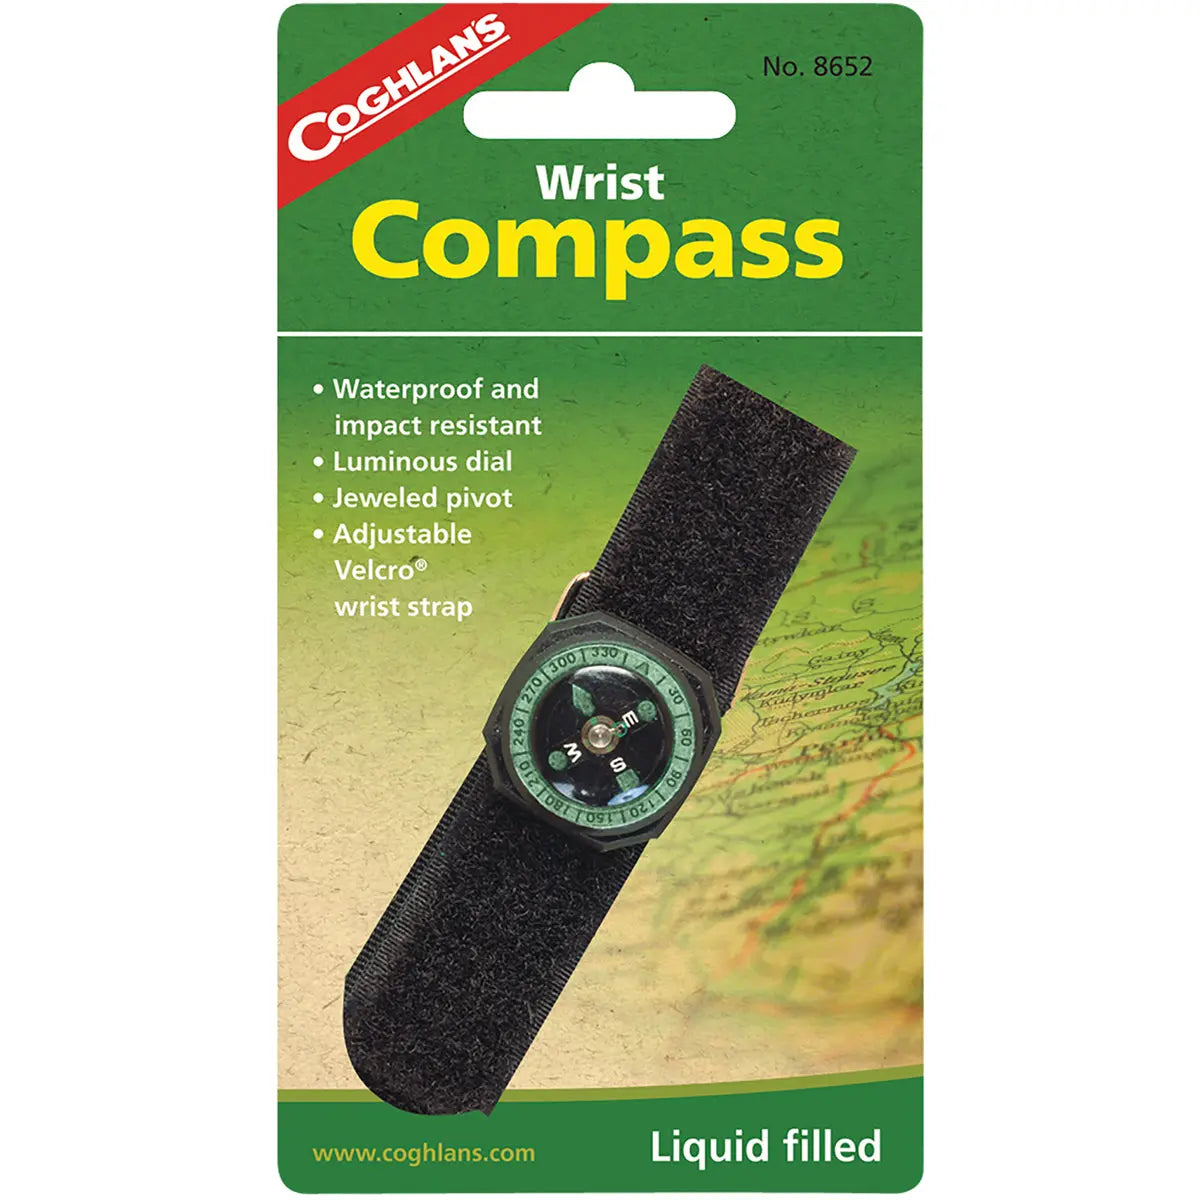 Coghlan's Wrist Compass w/ Strap, Waterproof & Impact Resistant Survival Camping Coghlan's